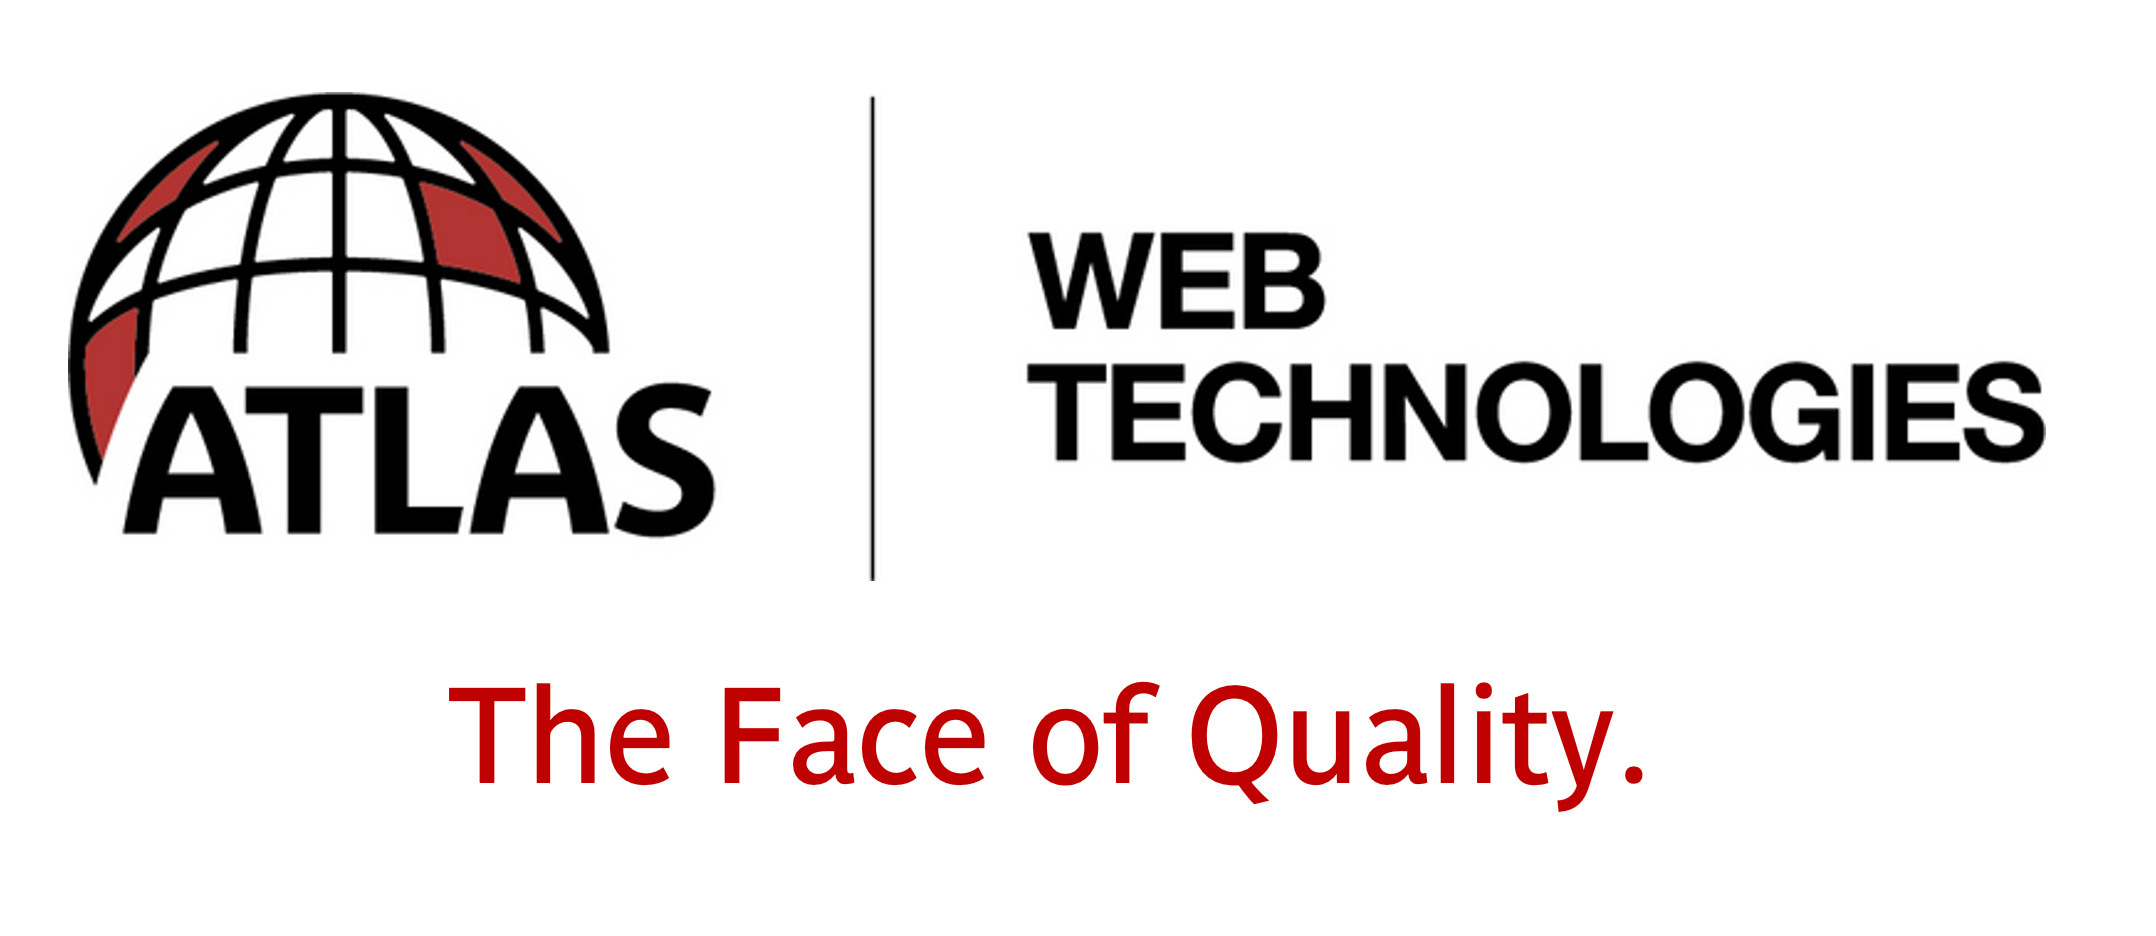 Atlas Webtech - The Face of Quality graphic